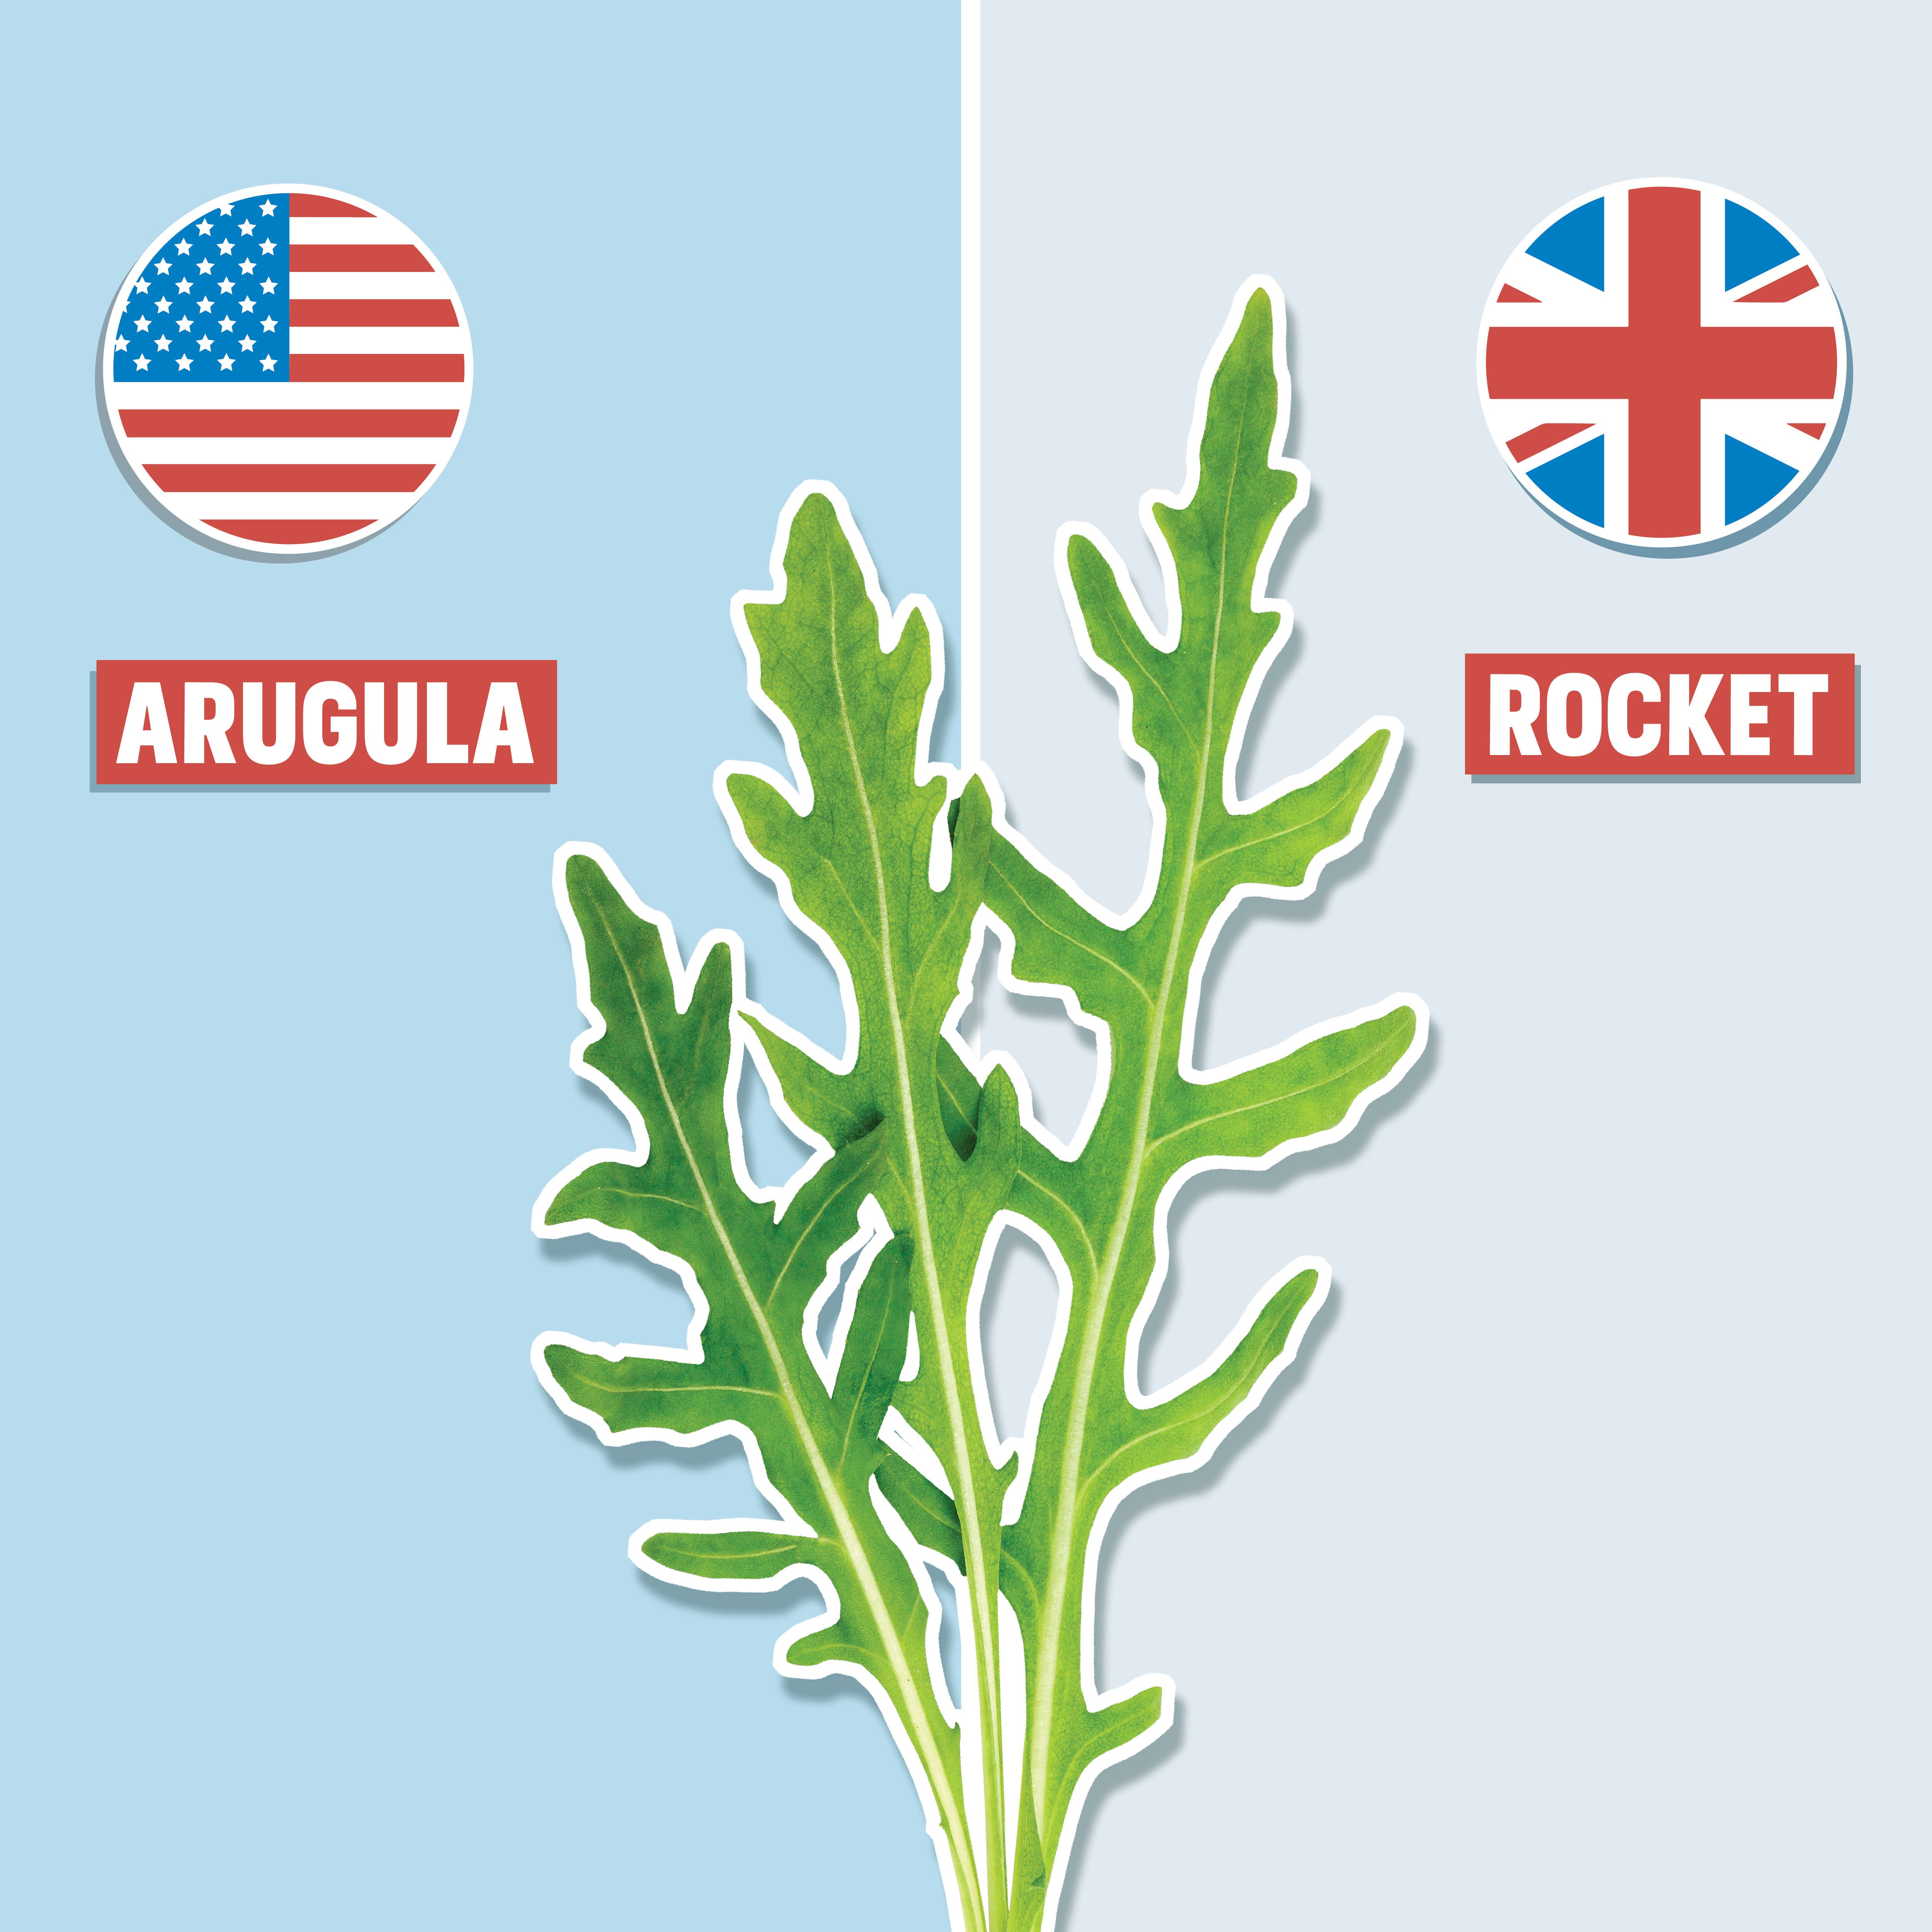 arugula on blue background with american and british english pronunciation on either side